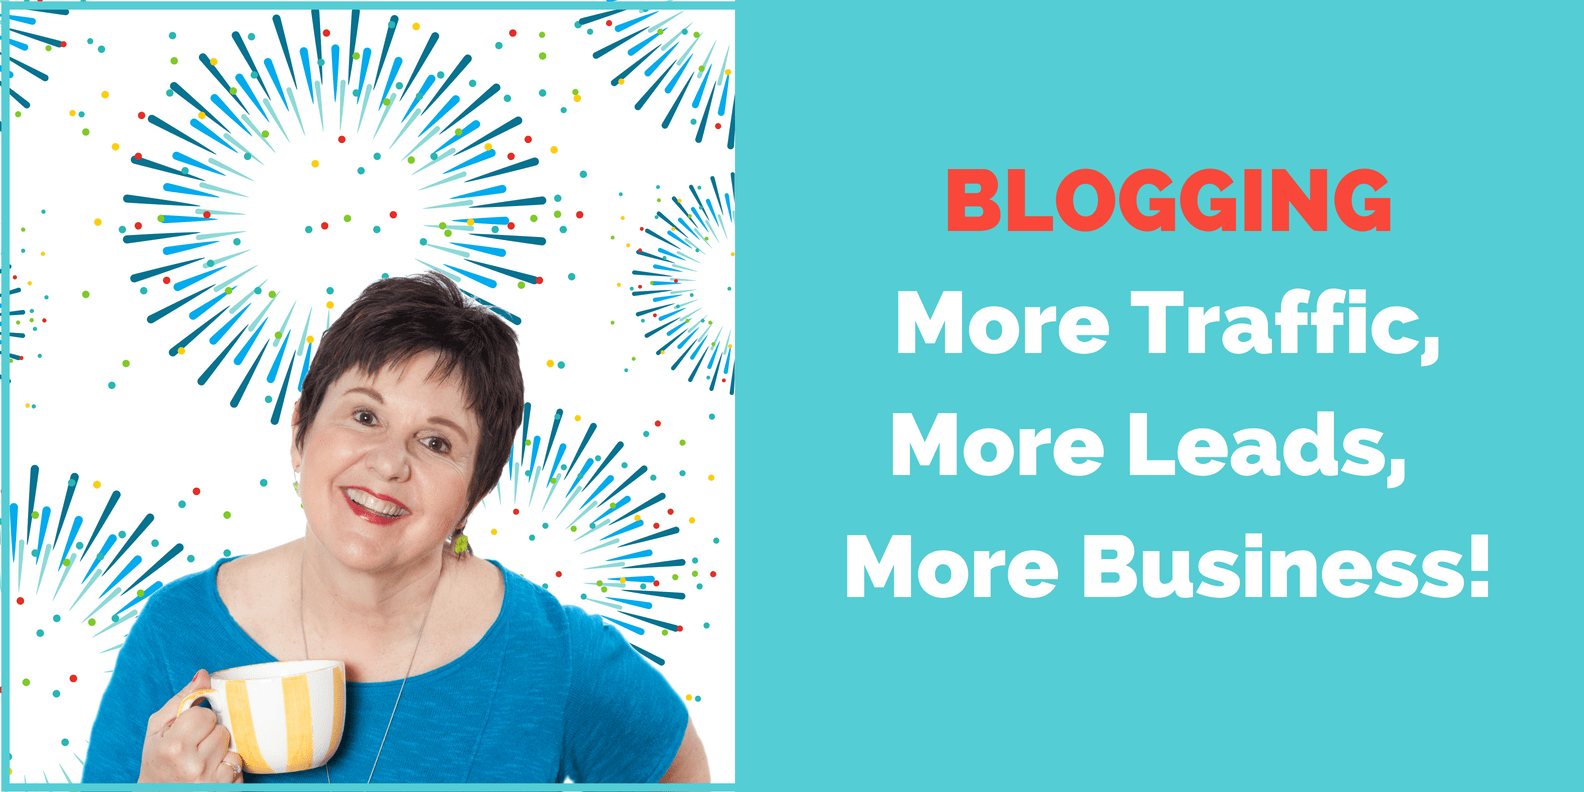 blogging more traffic, more leads, more business